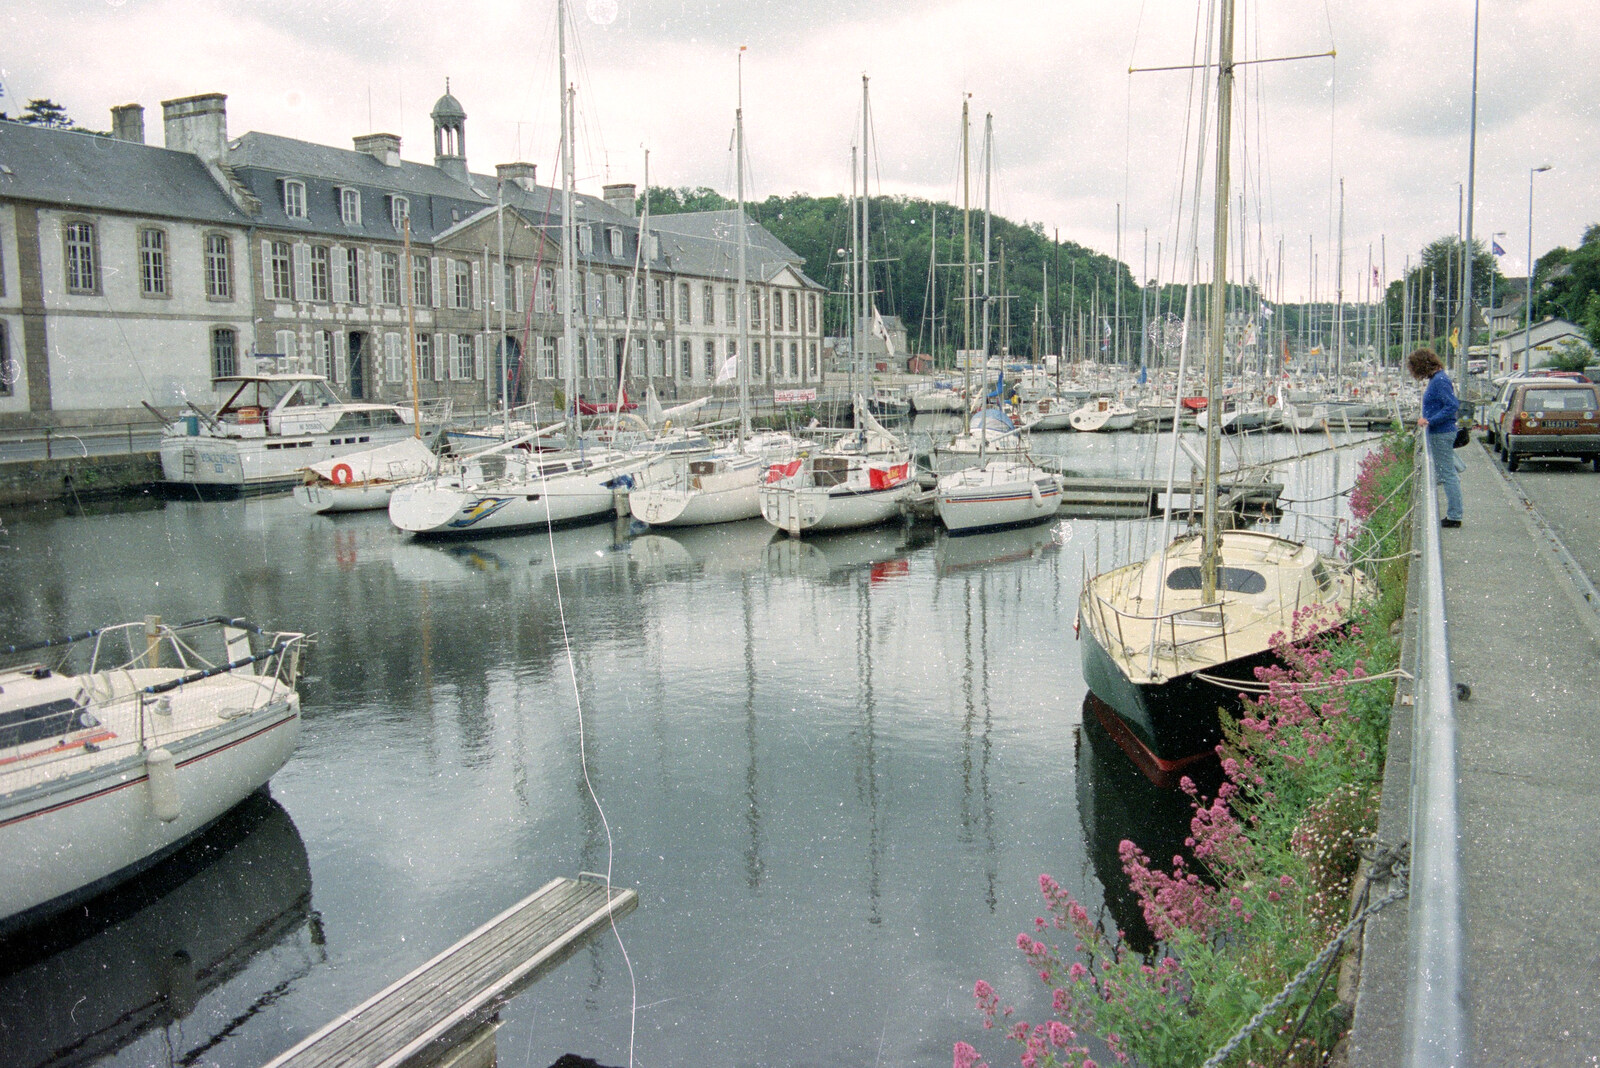 A Trip To Huelgoat, Brittany, France - 11th June 1990: Angela looks at boats on a river